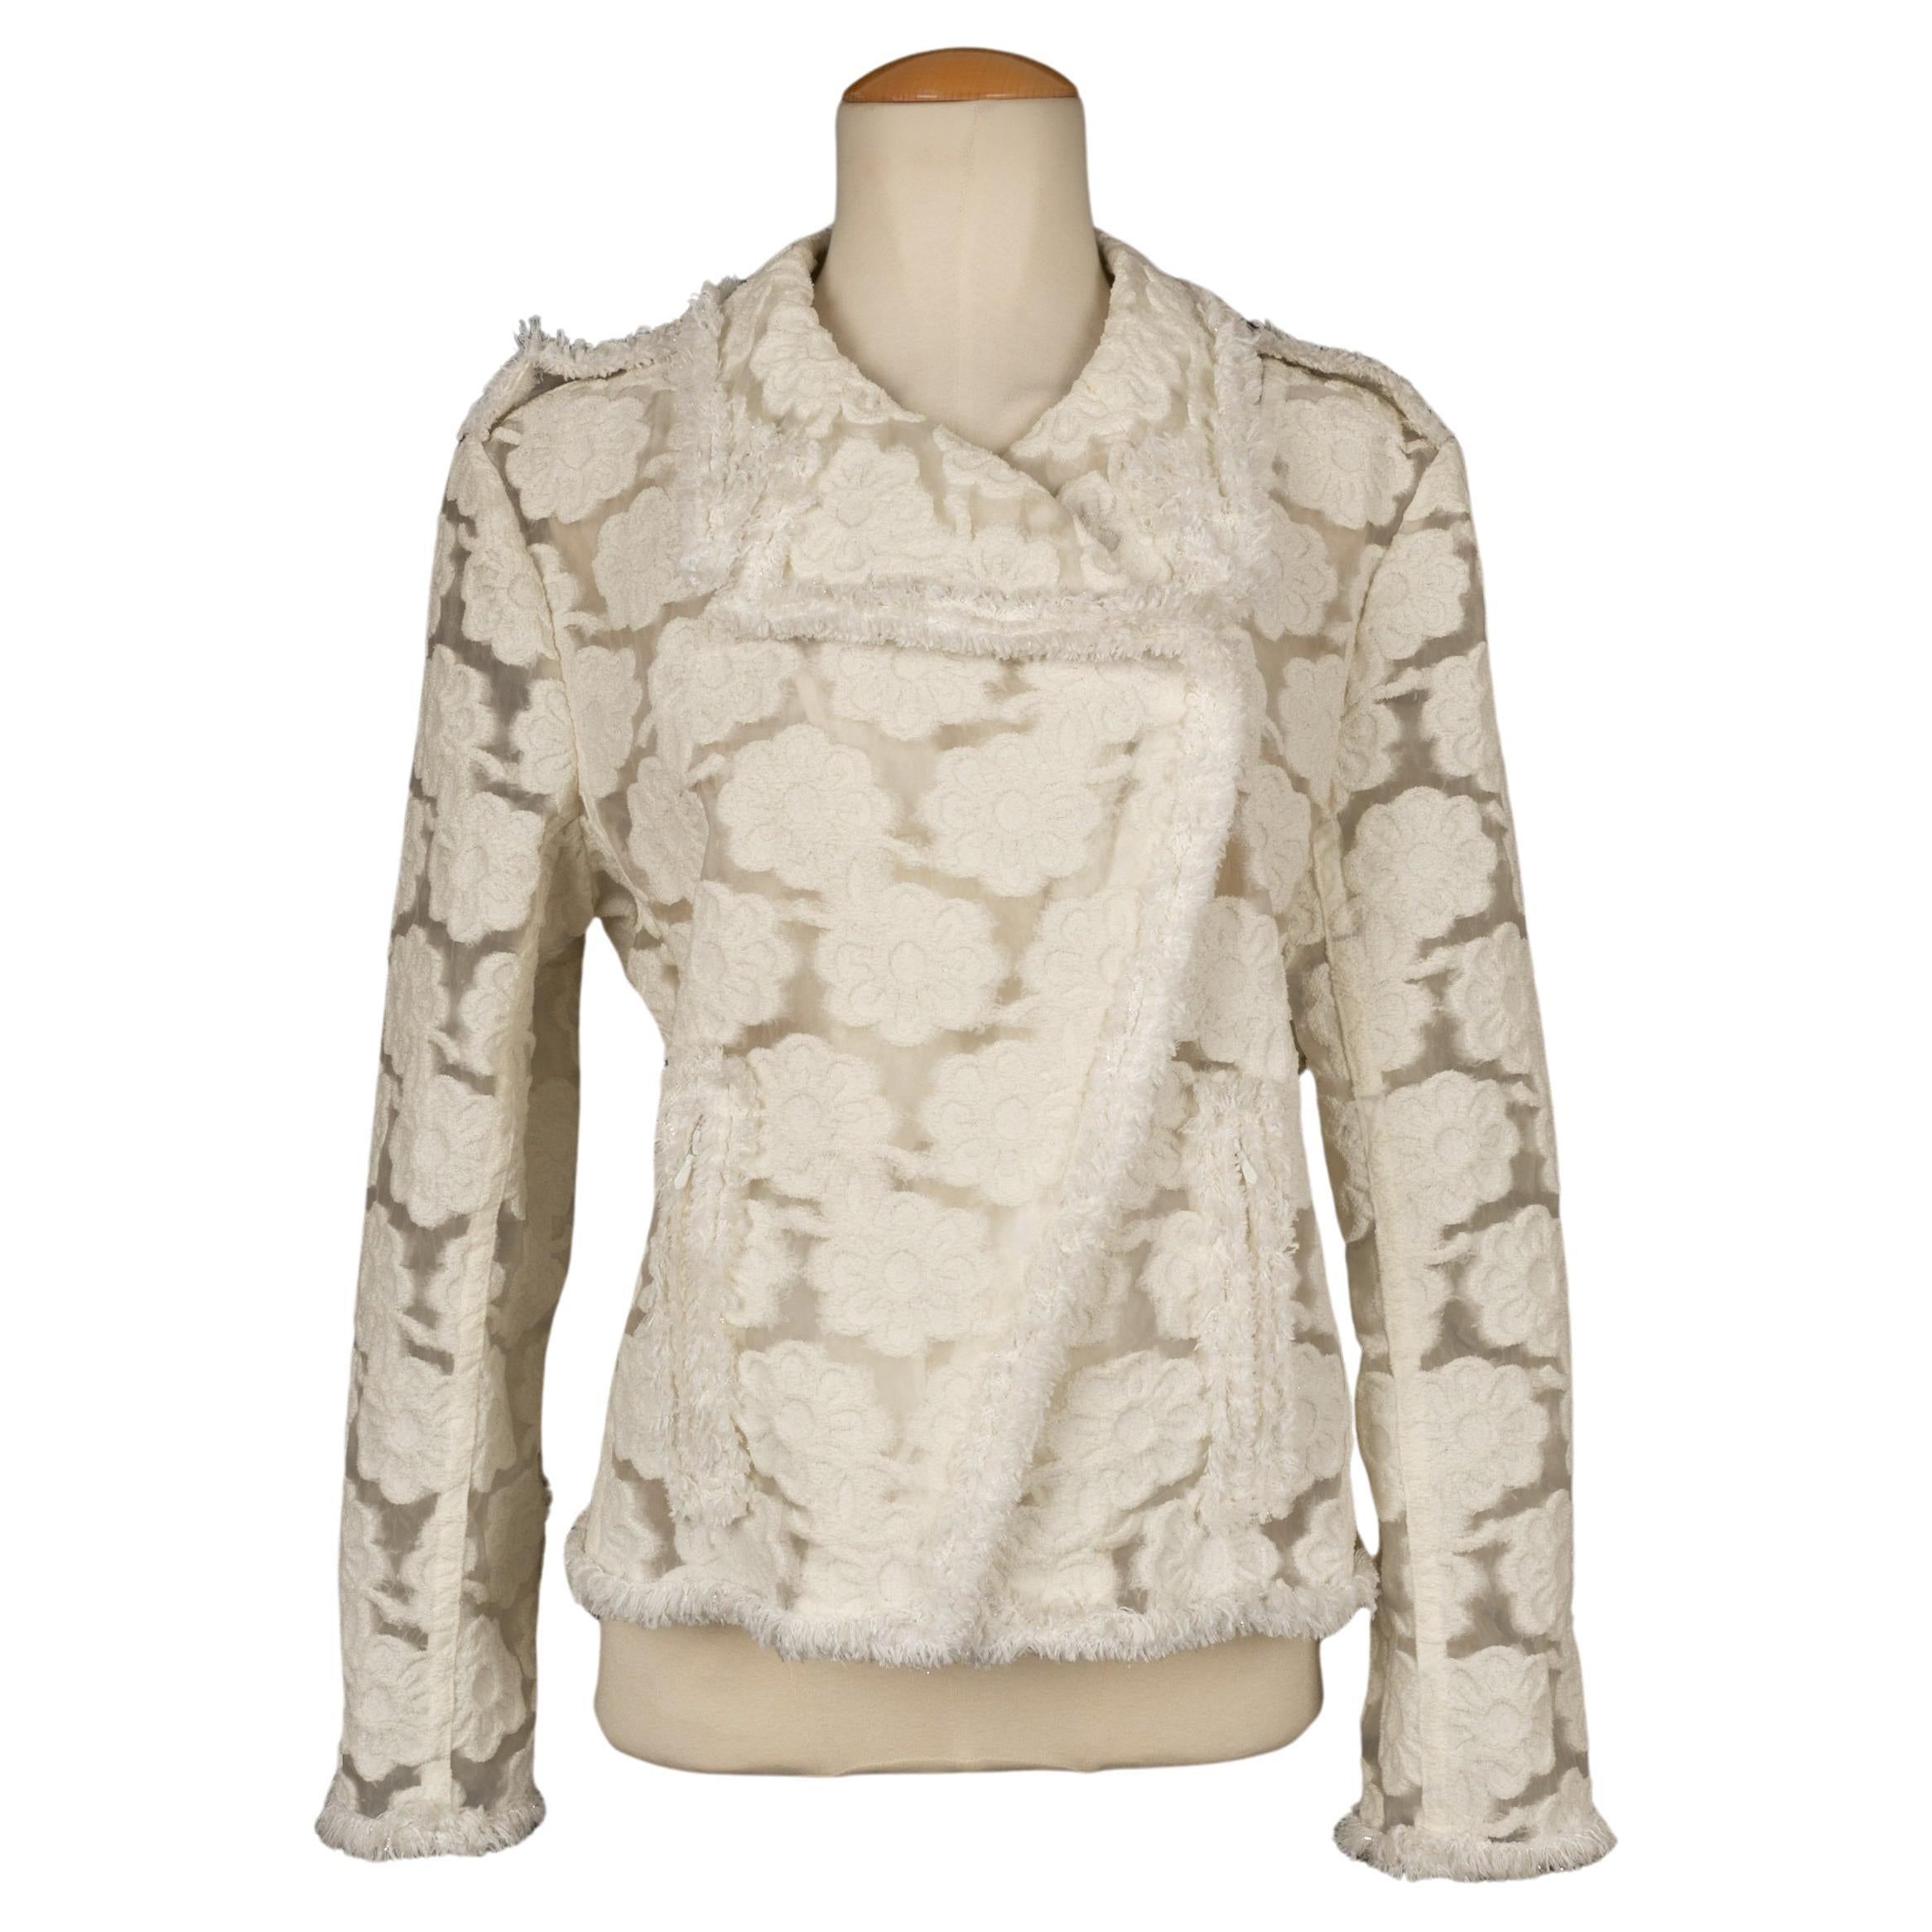 Chanel Blended Cotton Openwork Jacket Representing White Flowers, 2009 For Sale